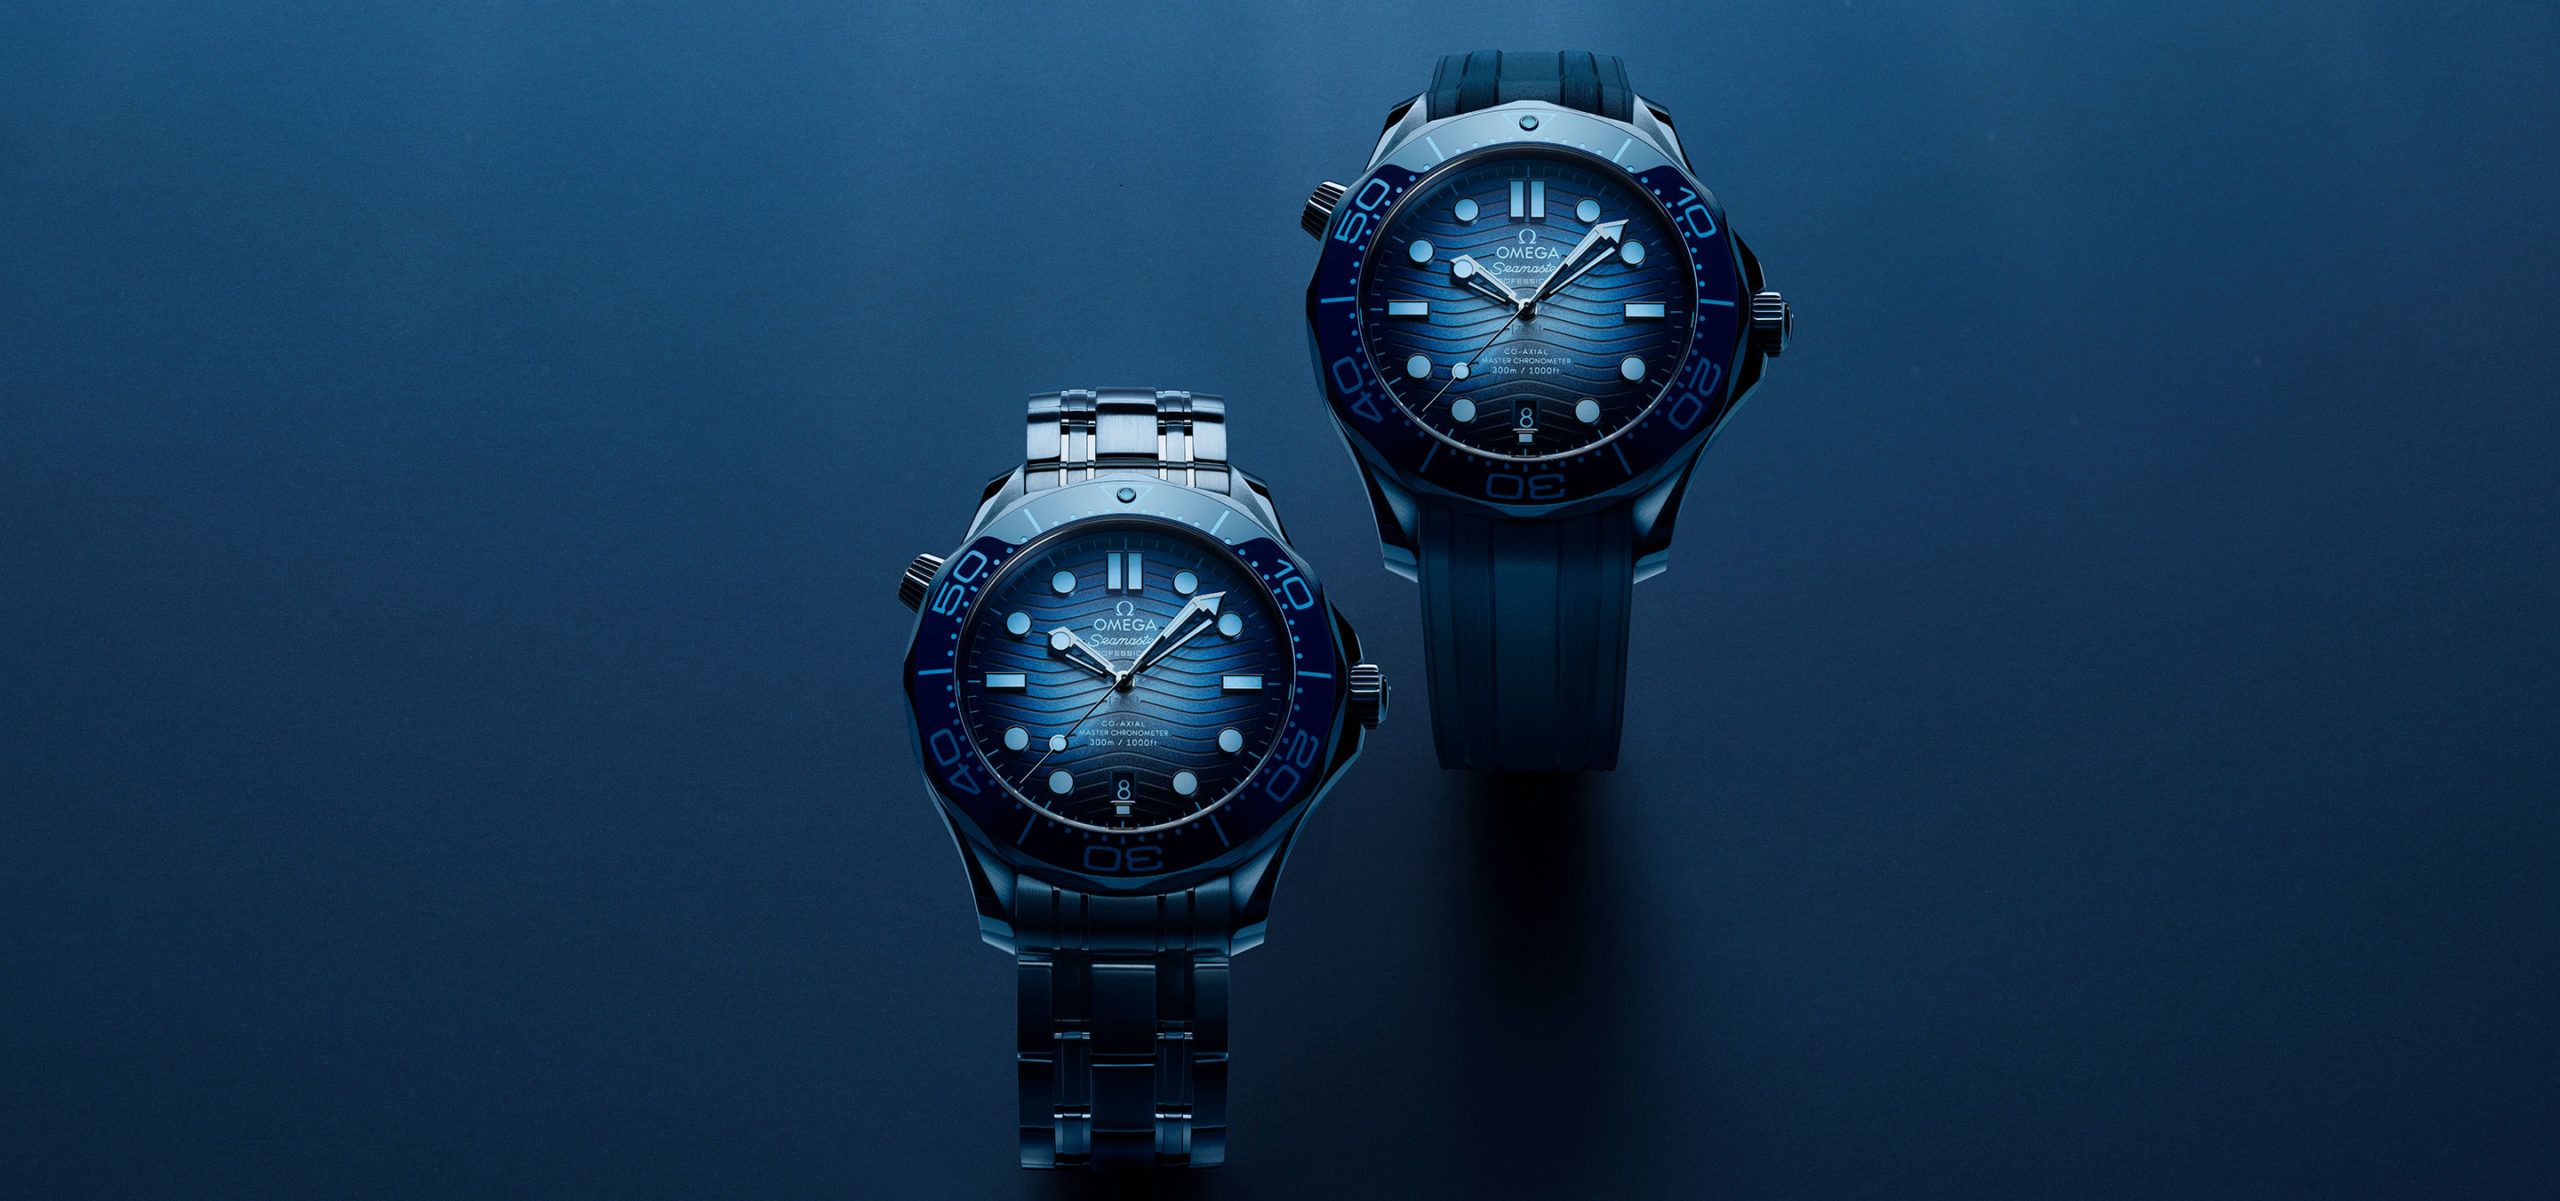 An Ode To The Sea: Omega Celebrate 75 Years Of The Seamaster With Their Summer Blue Collection